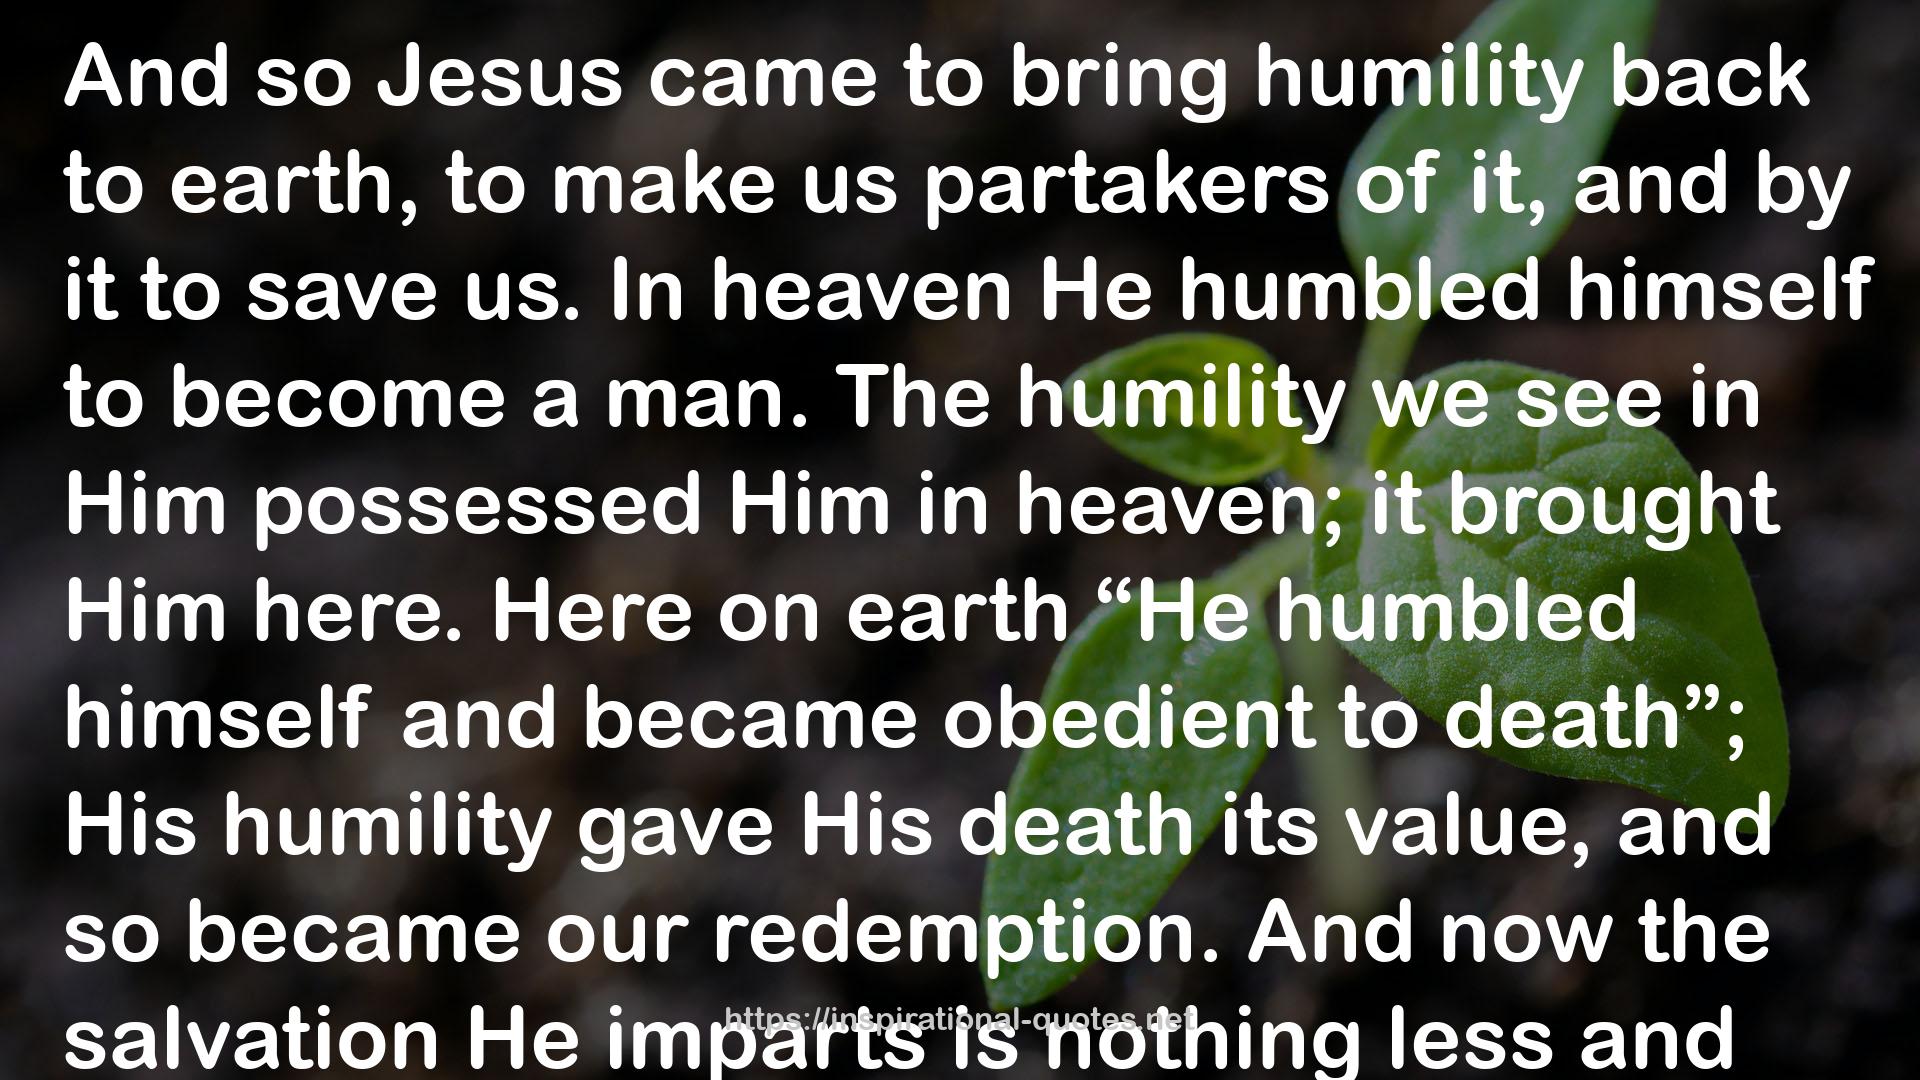 Humility: The Journey Toward Holiness QUOTES